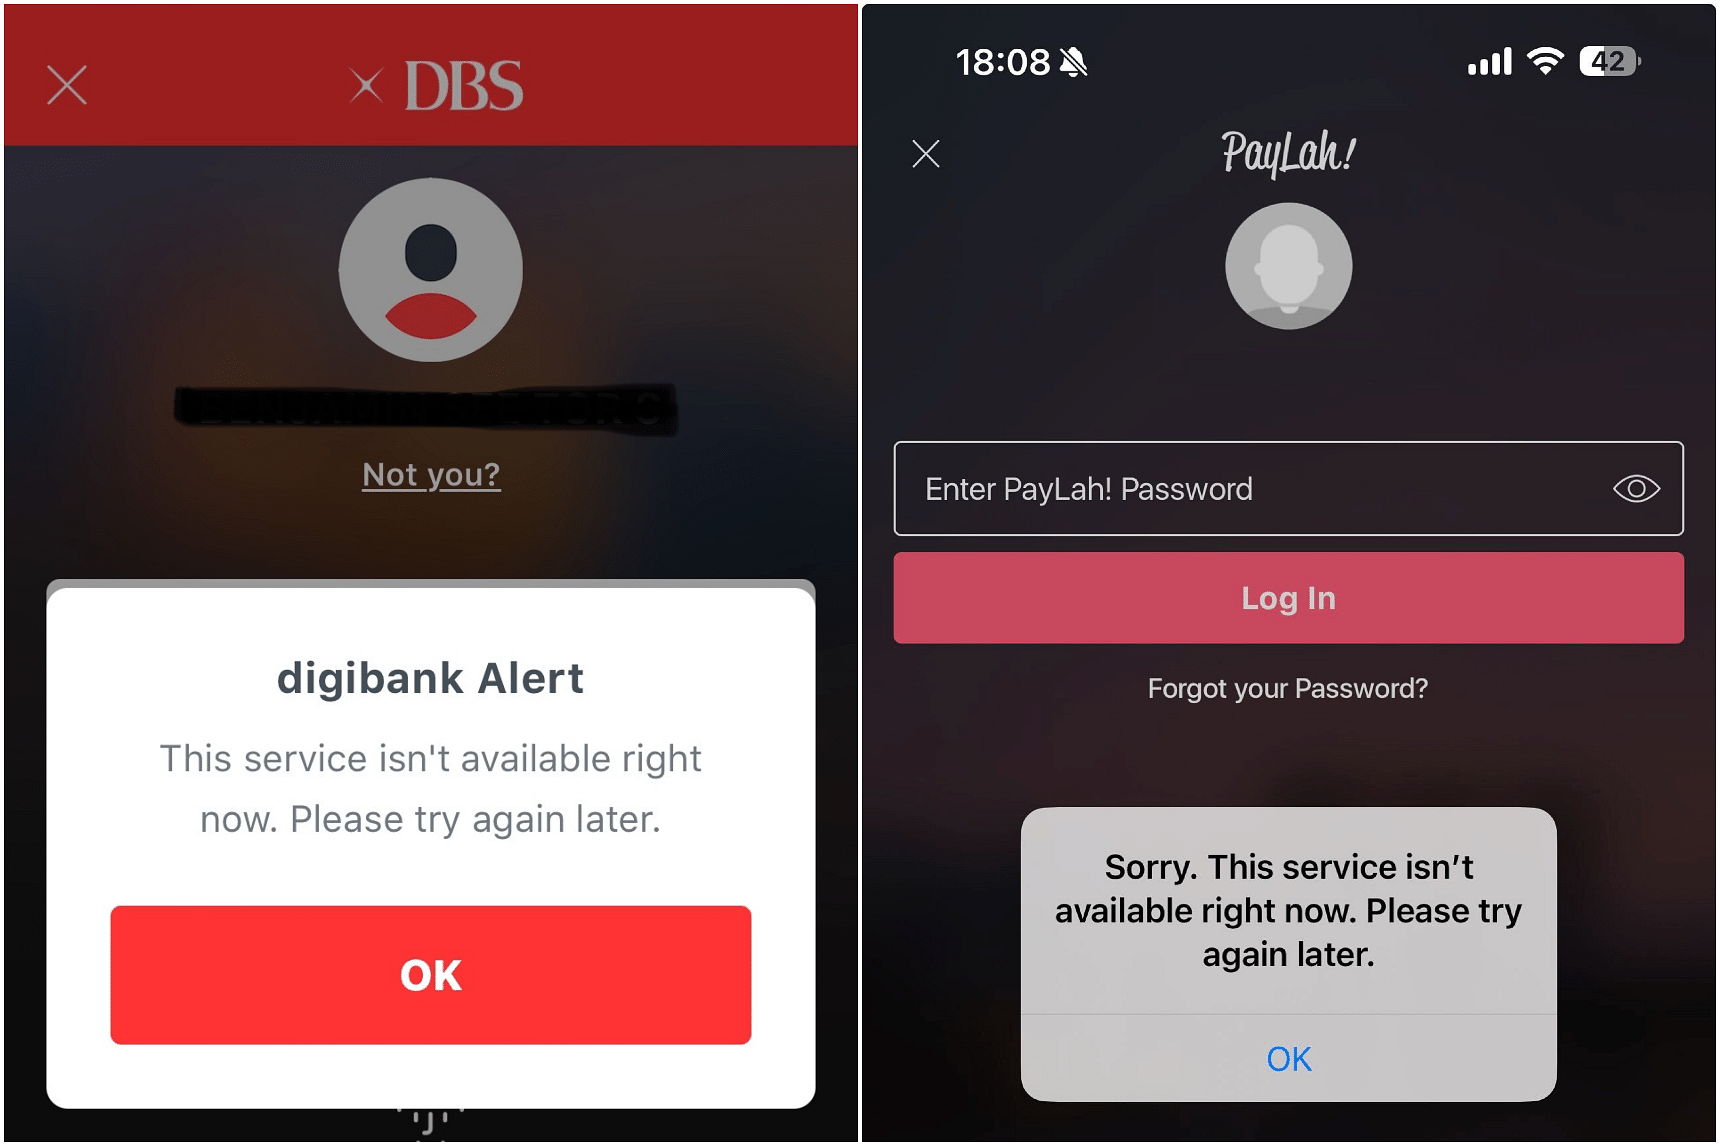 DBS/POSB digital banking services down for some customers